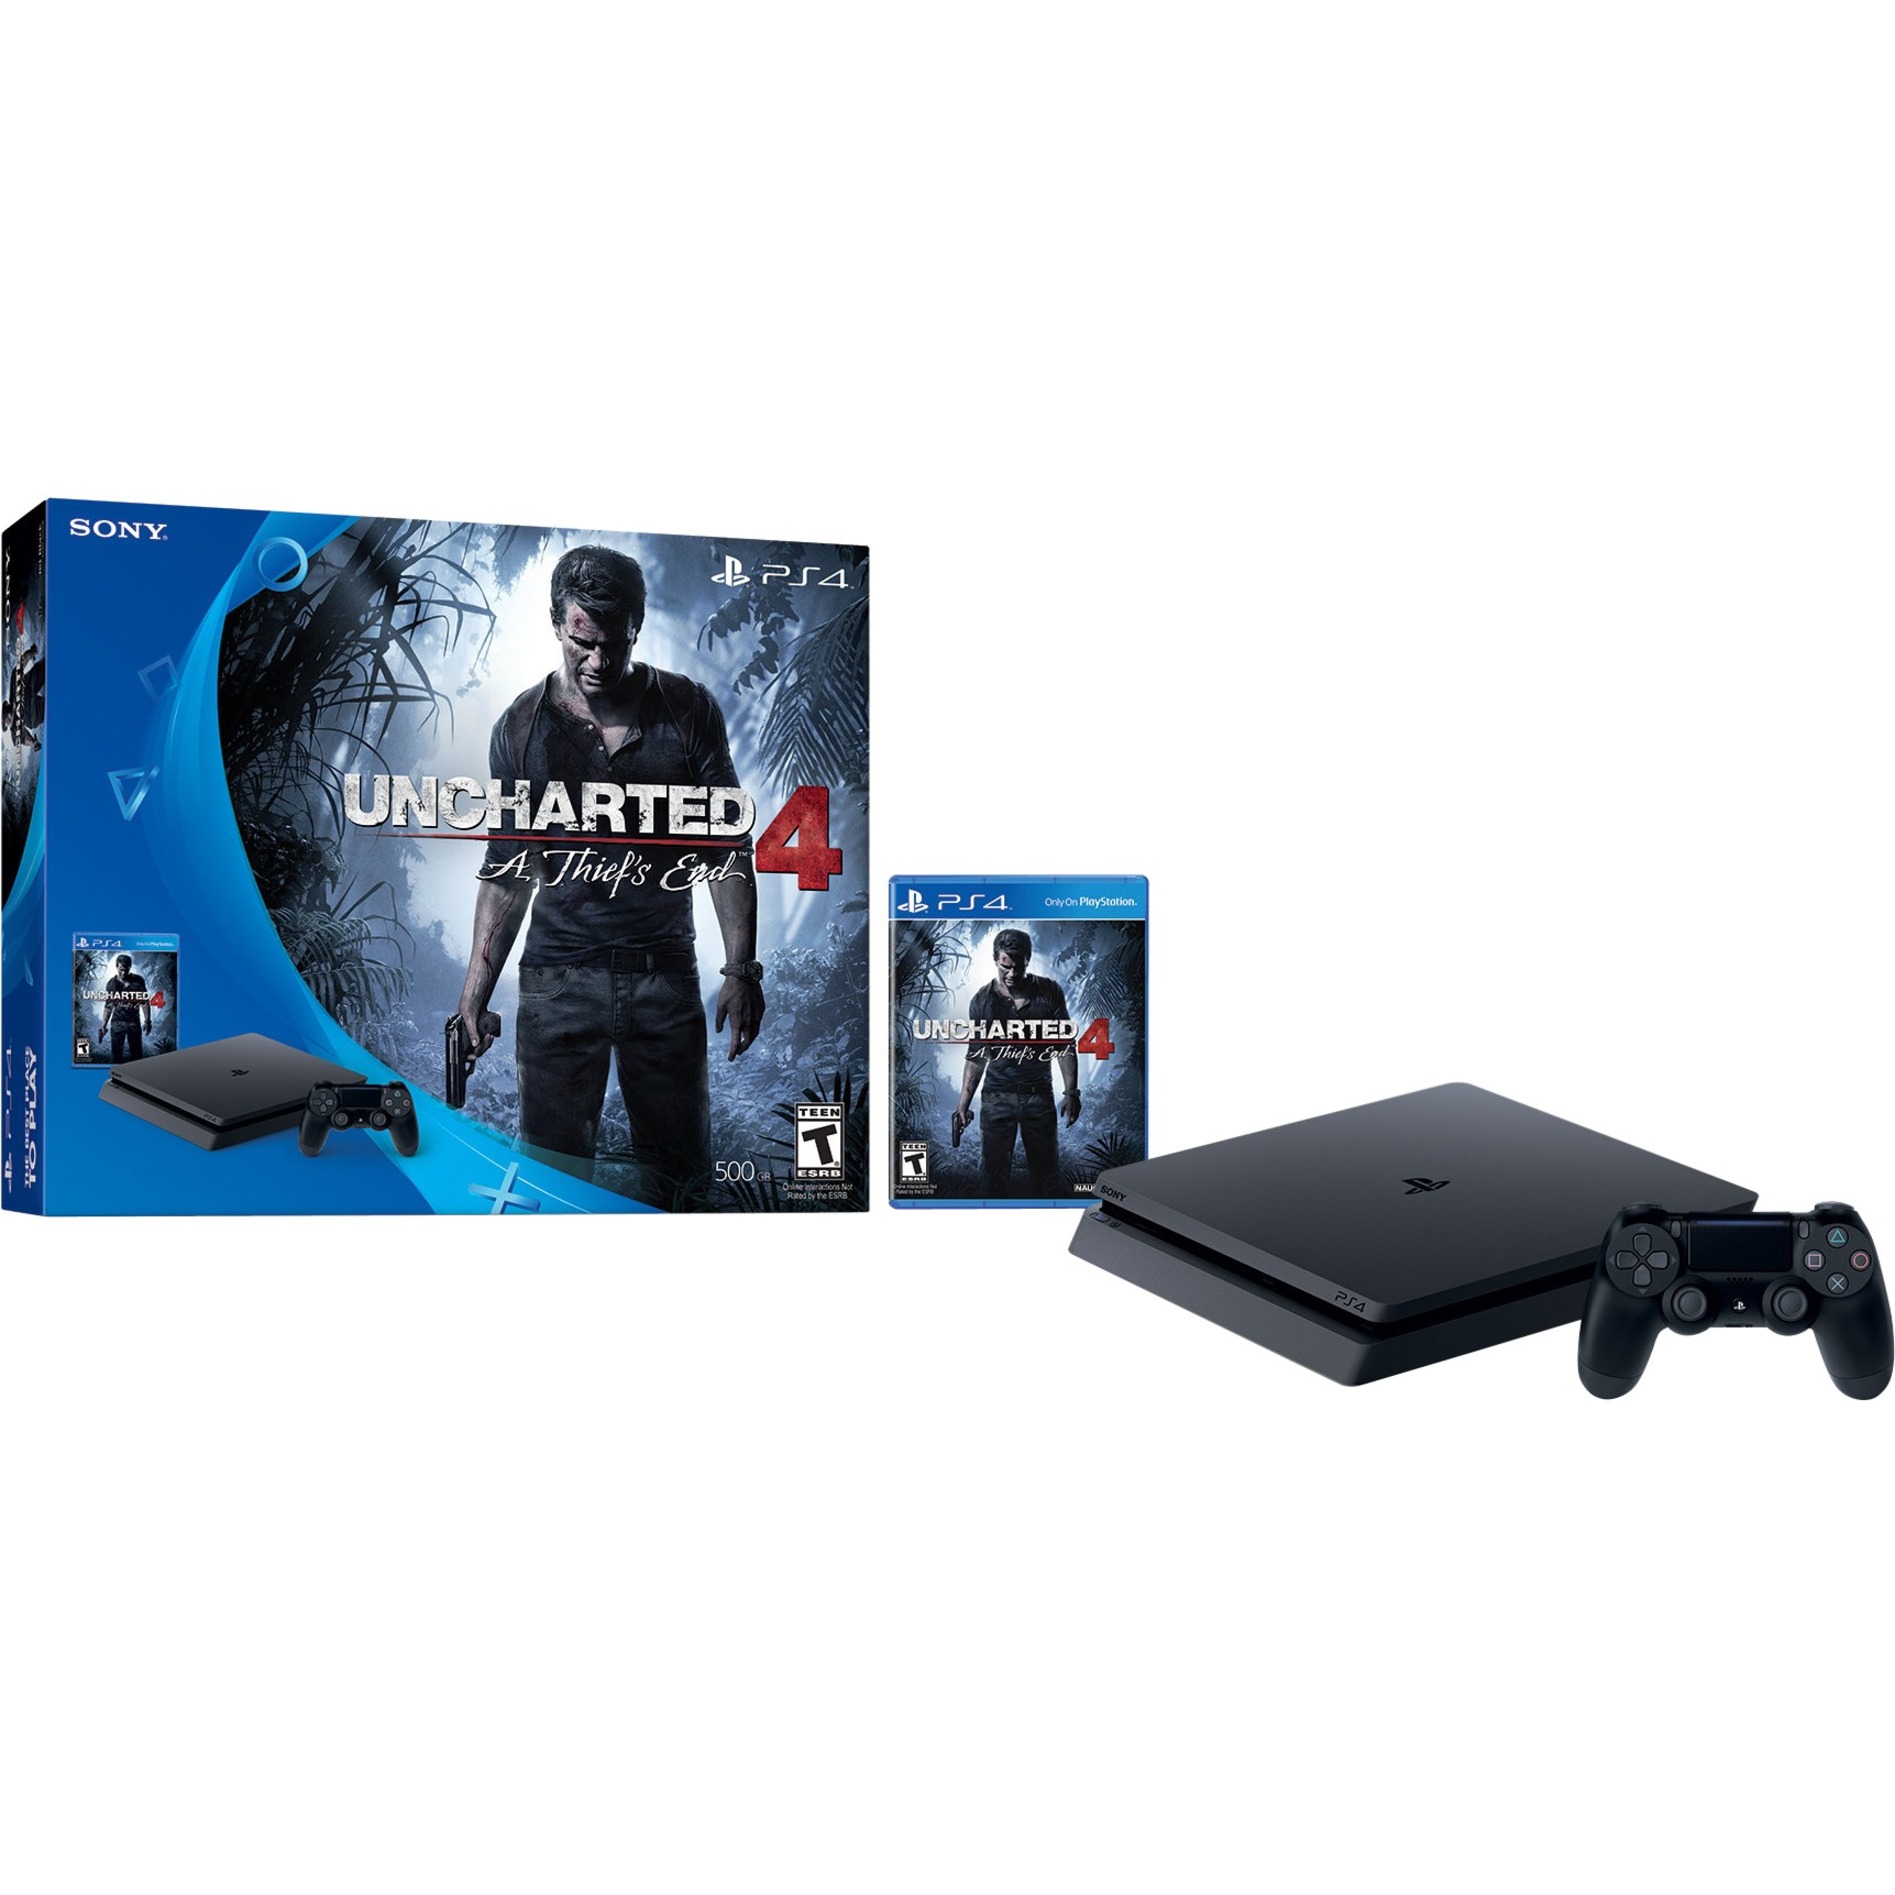 Sony Uncharted 4: A Thief's End PlayStation 4 Bundle - image 1 of 4